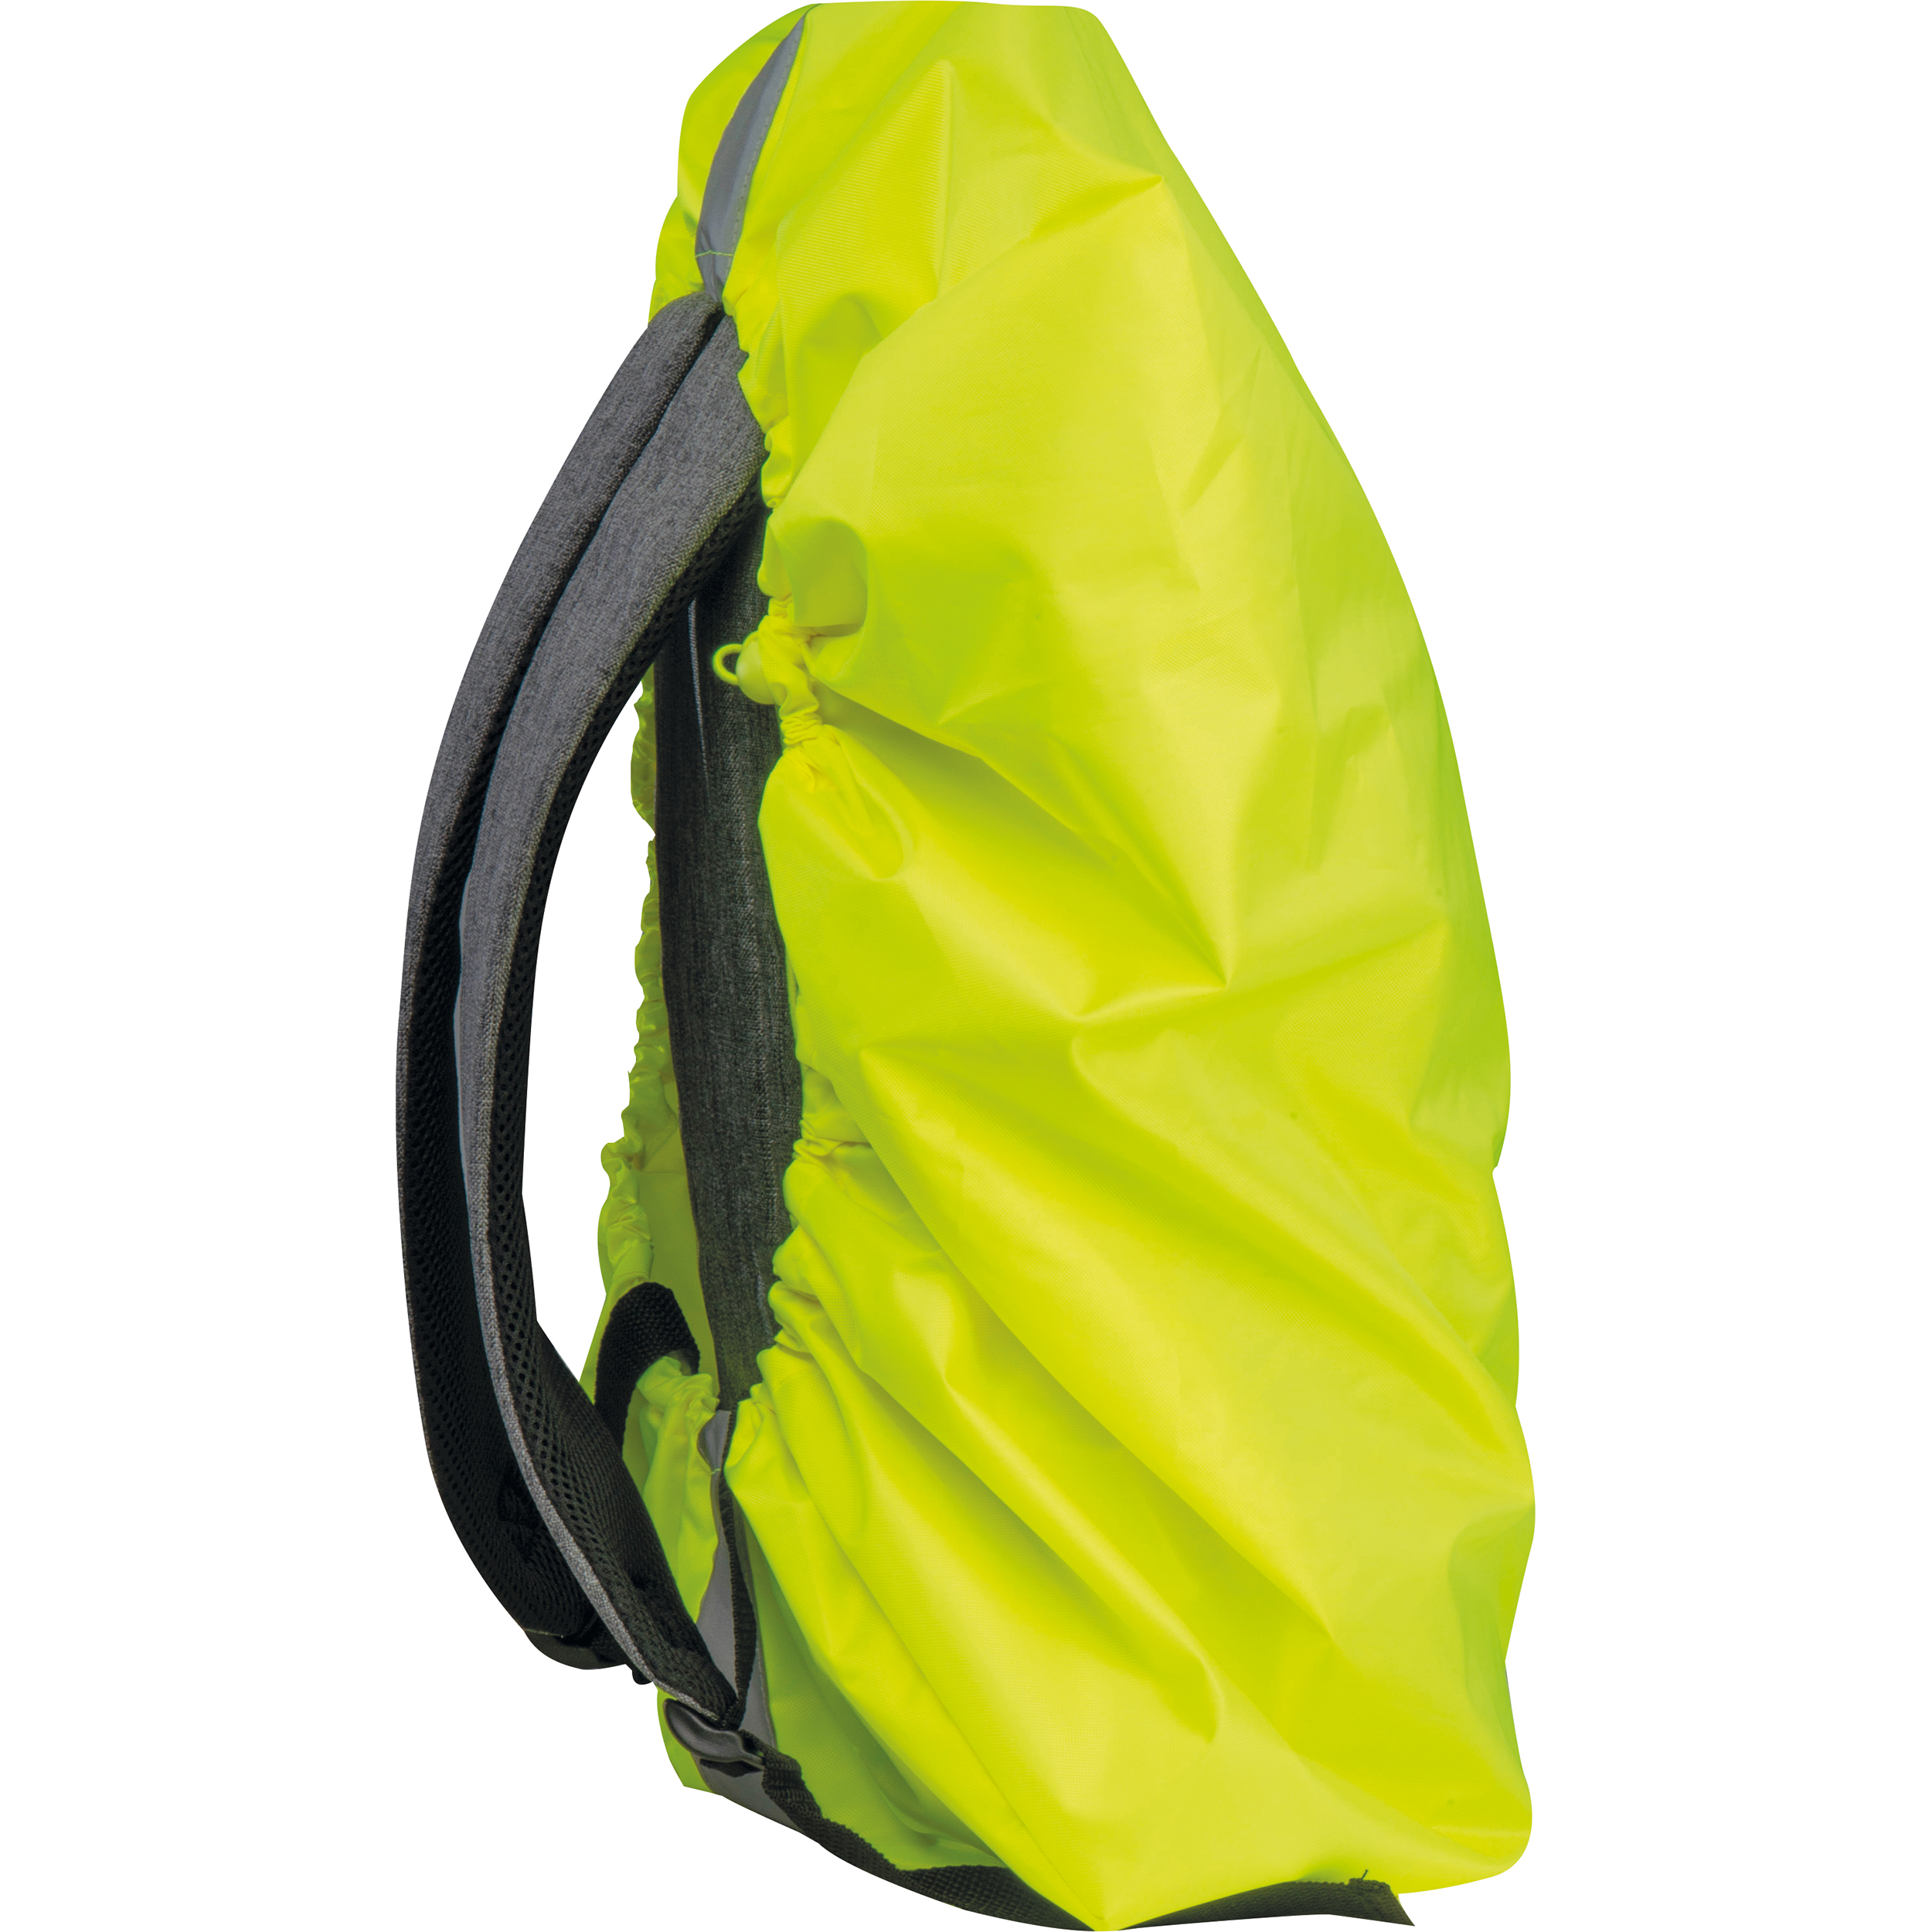 Rain cover for backpacks with reflective strips and elastic drawstring